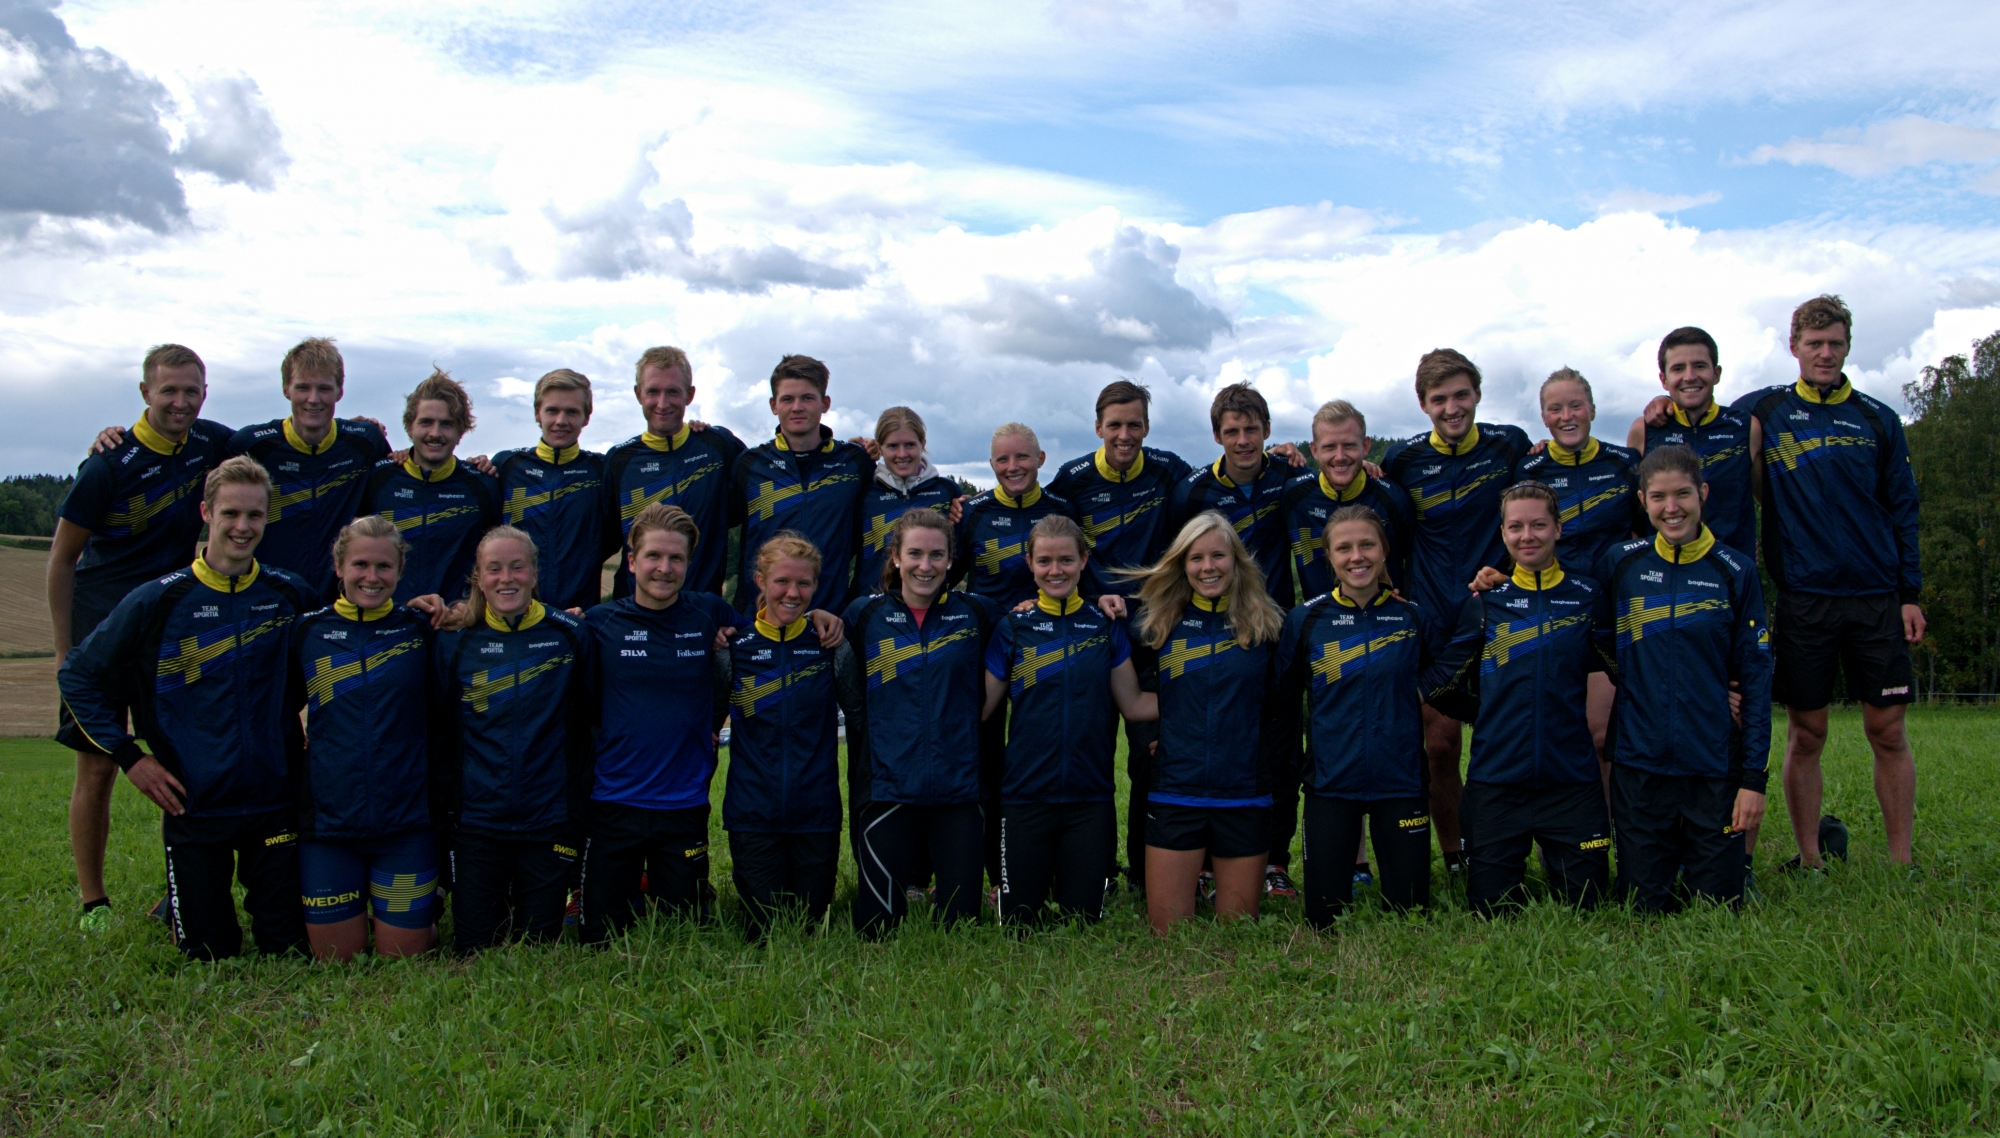 The Swedish training camp started with Euromeeting last weekend, and they have been joined by more of their regular national team runners since. 